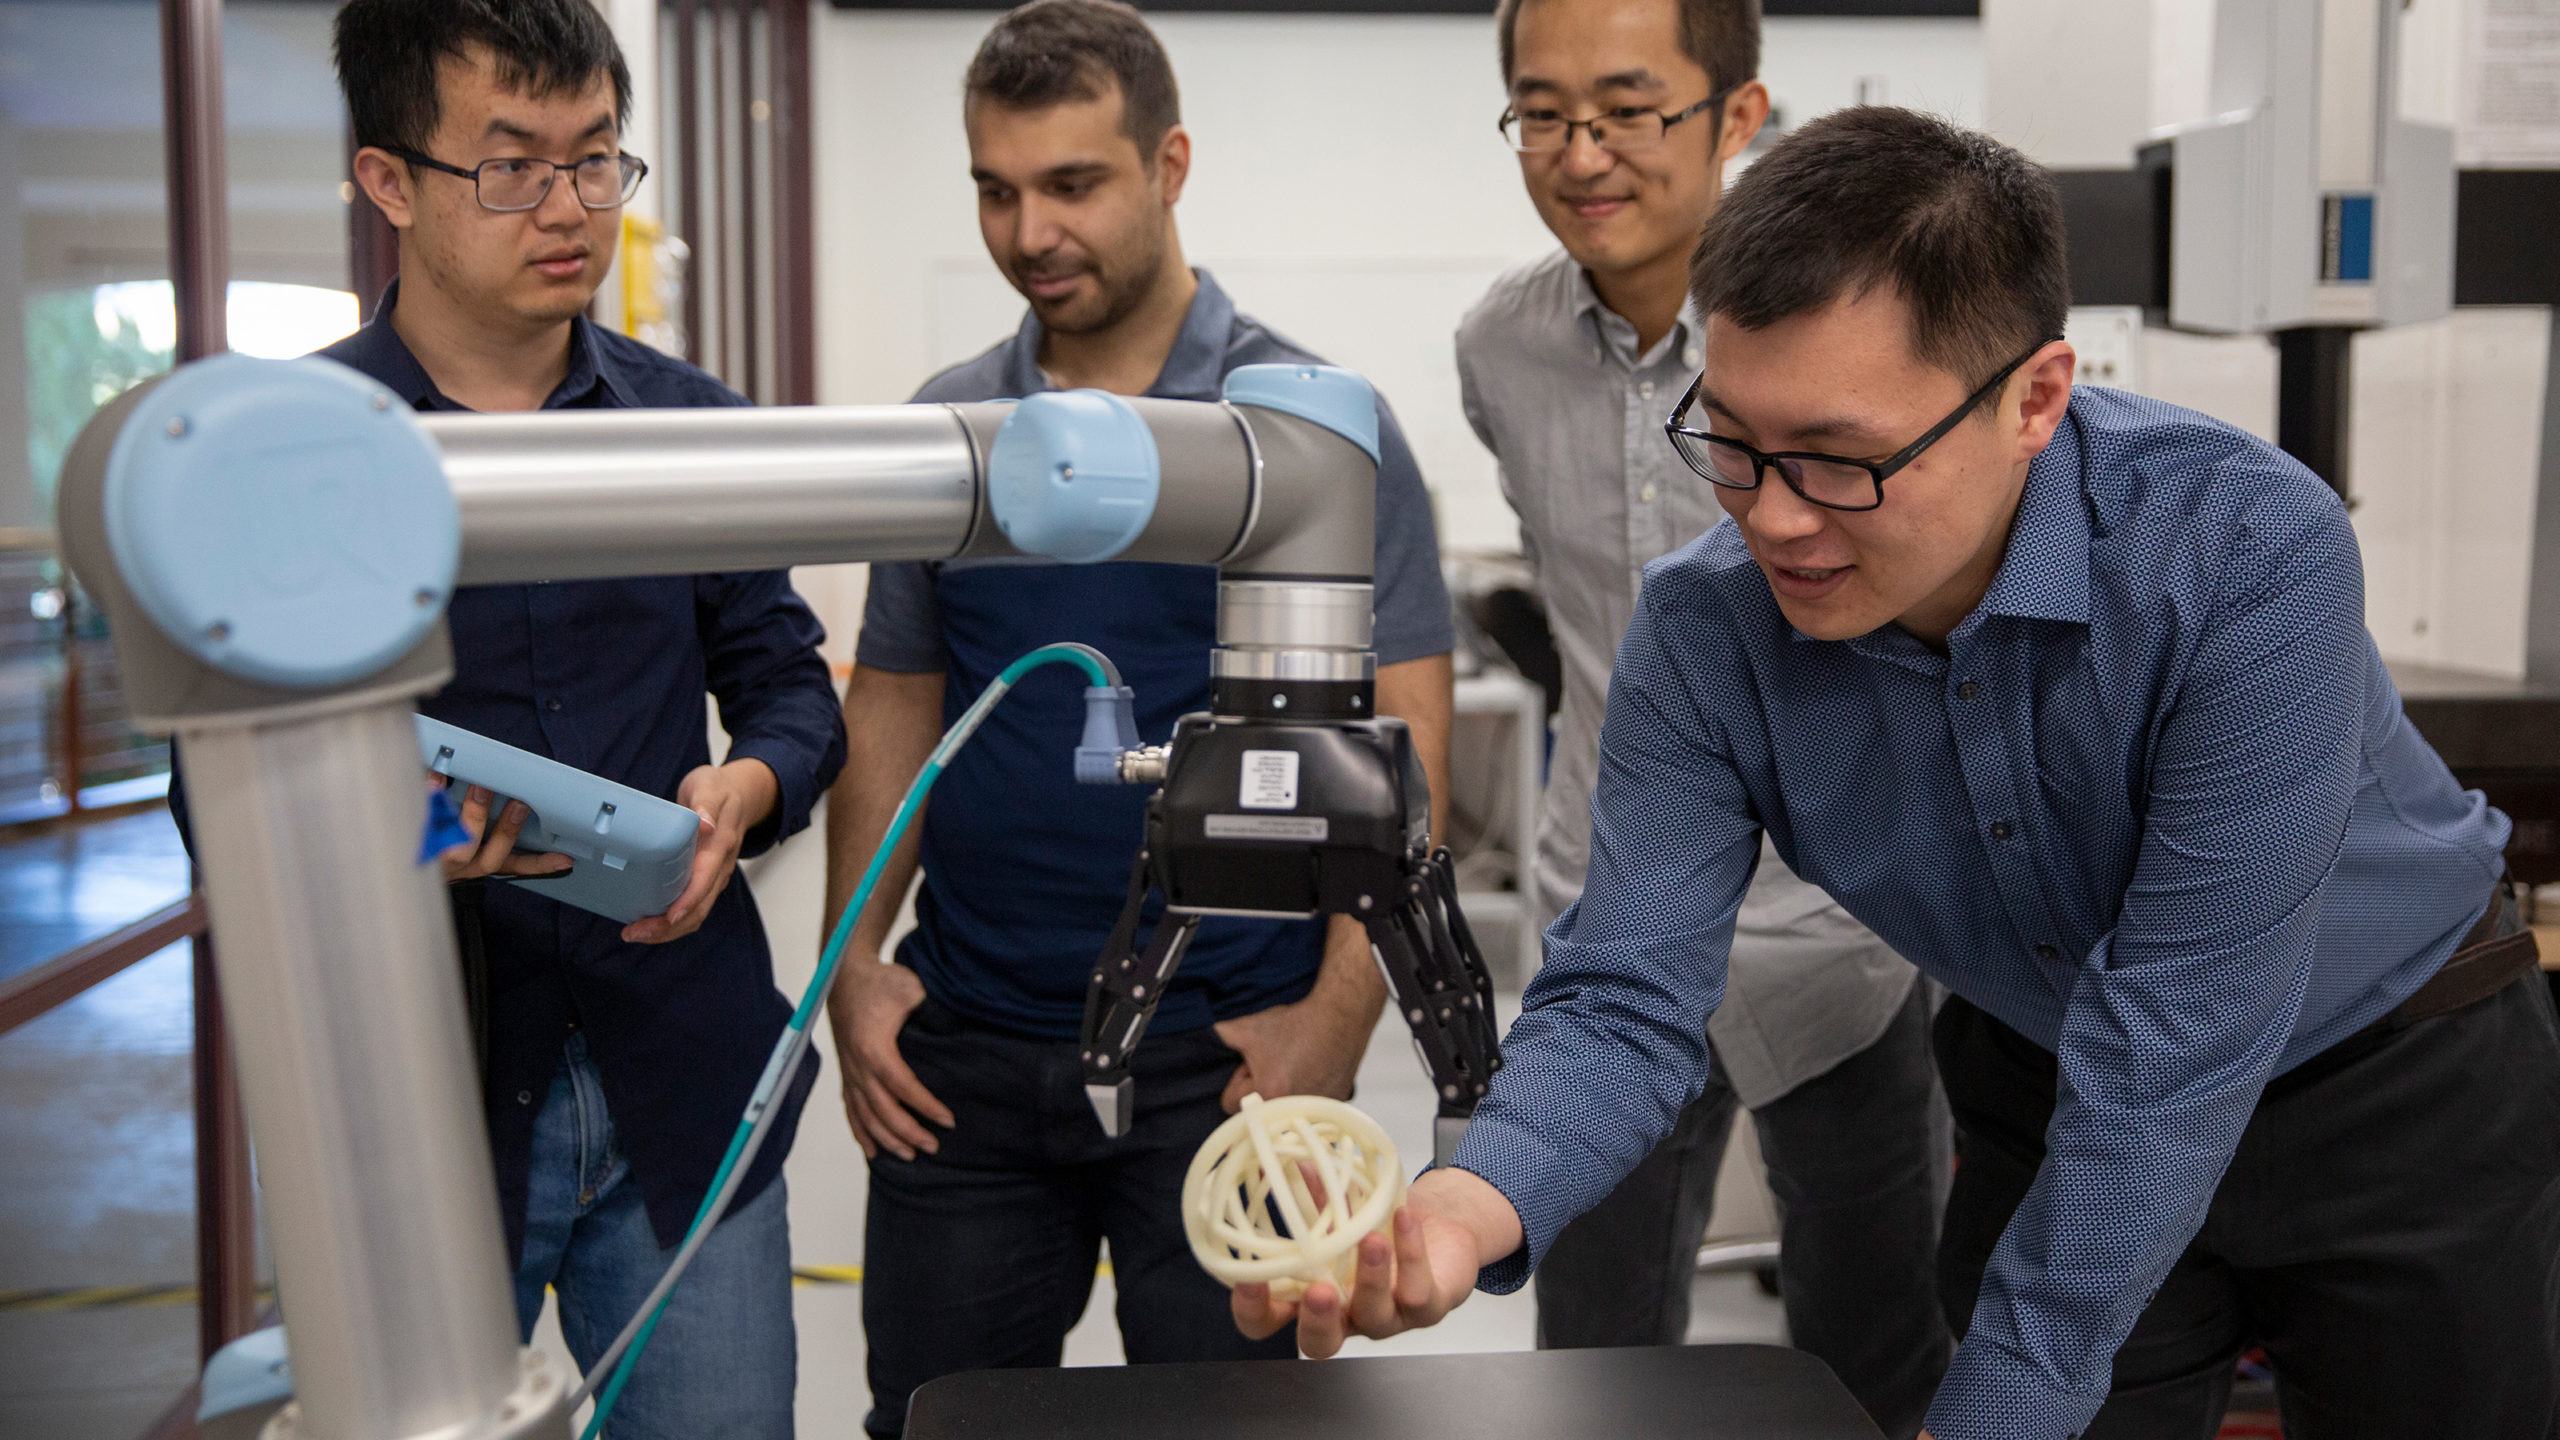 Feng Ju and his team at ASU's Manufacturing and Service Automation Lab are developing data tools to advance factory operations and minimize production disruptions. Photographer: Connor McKee/ASU